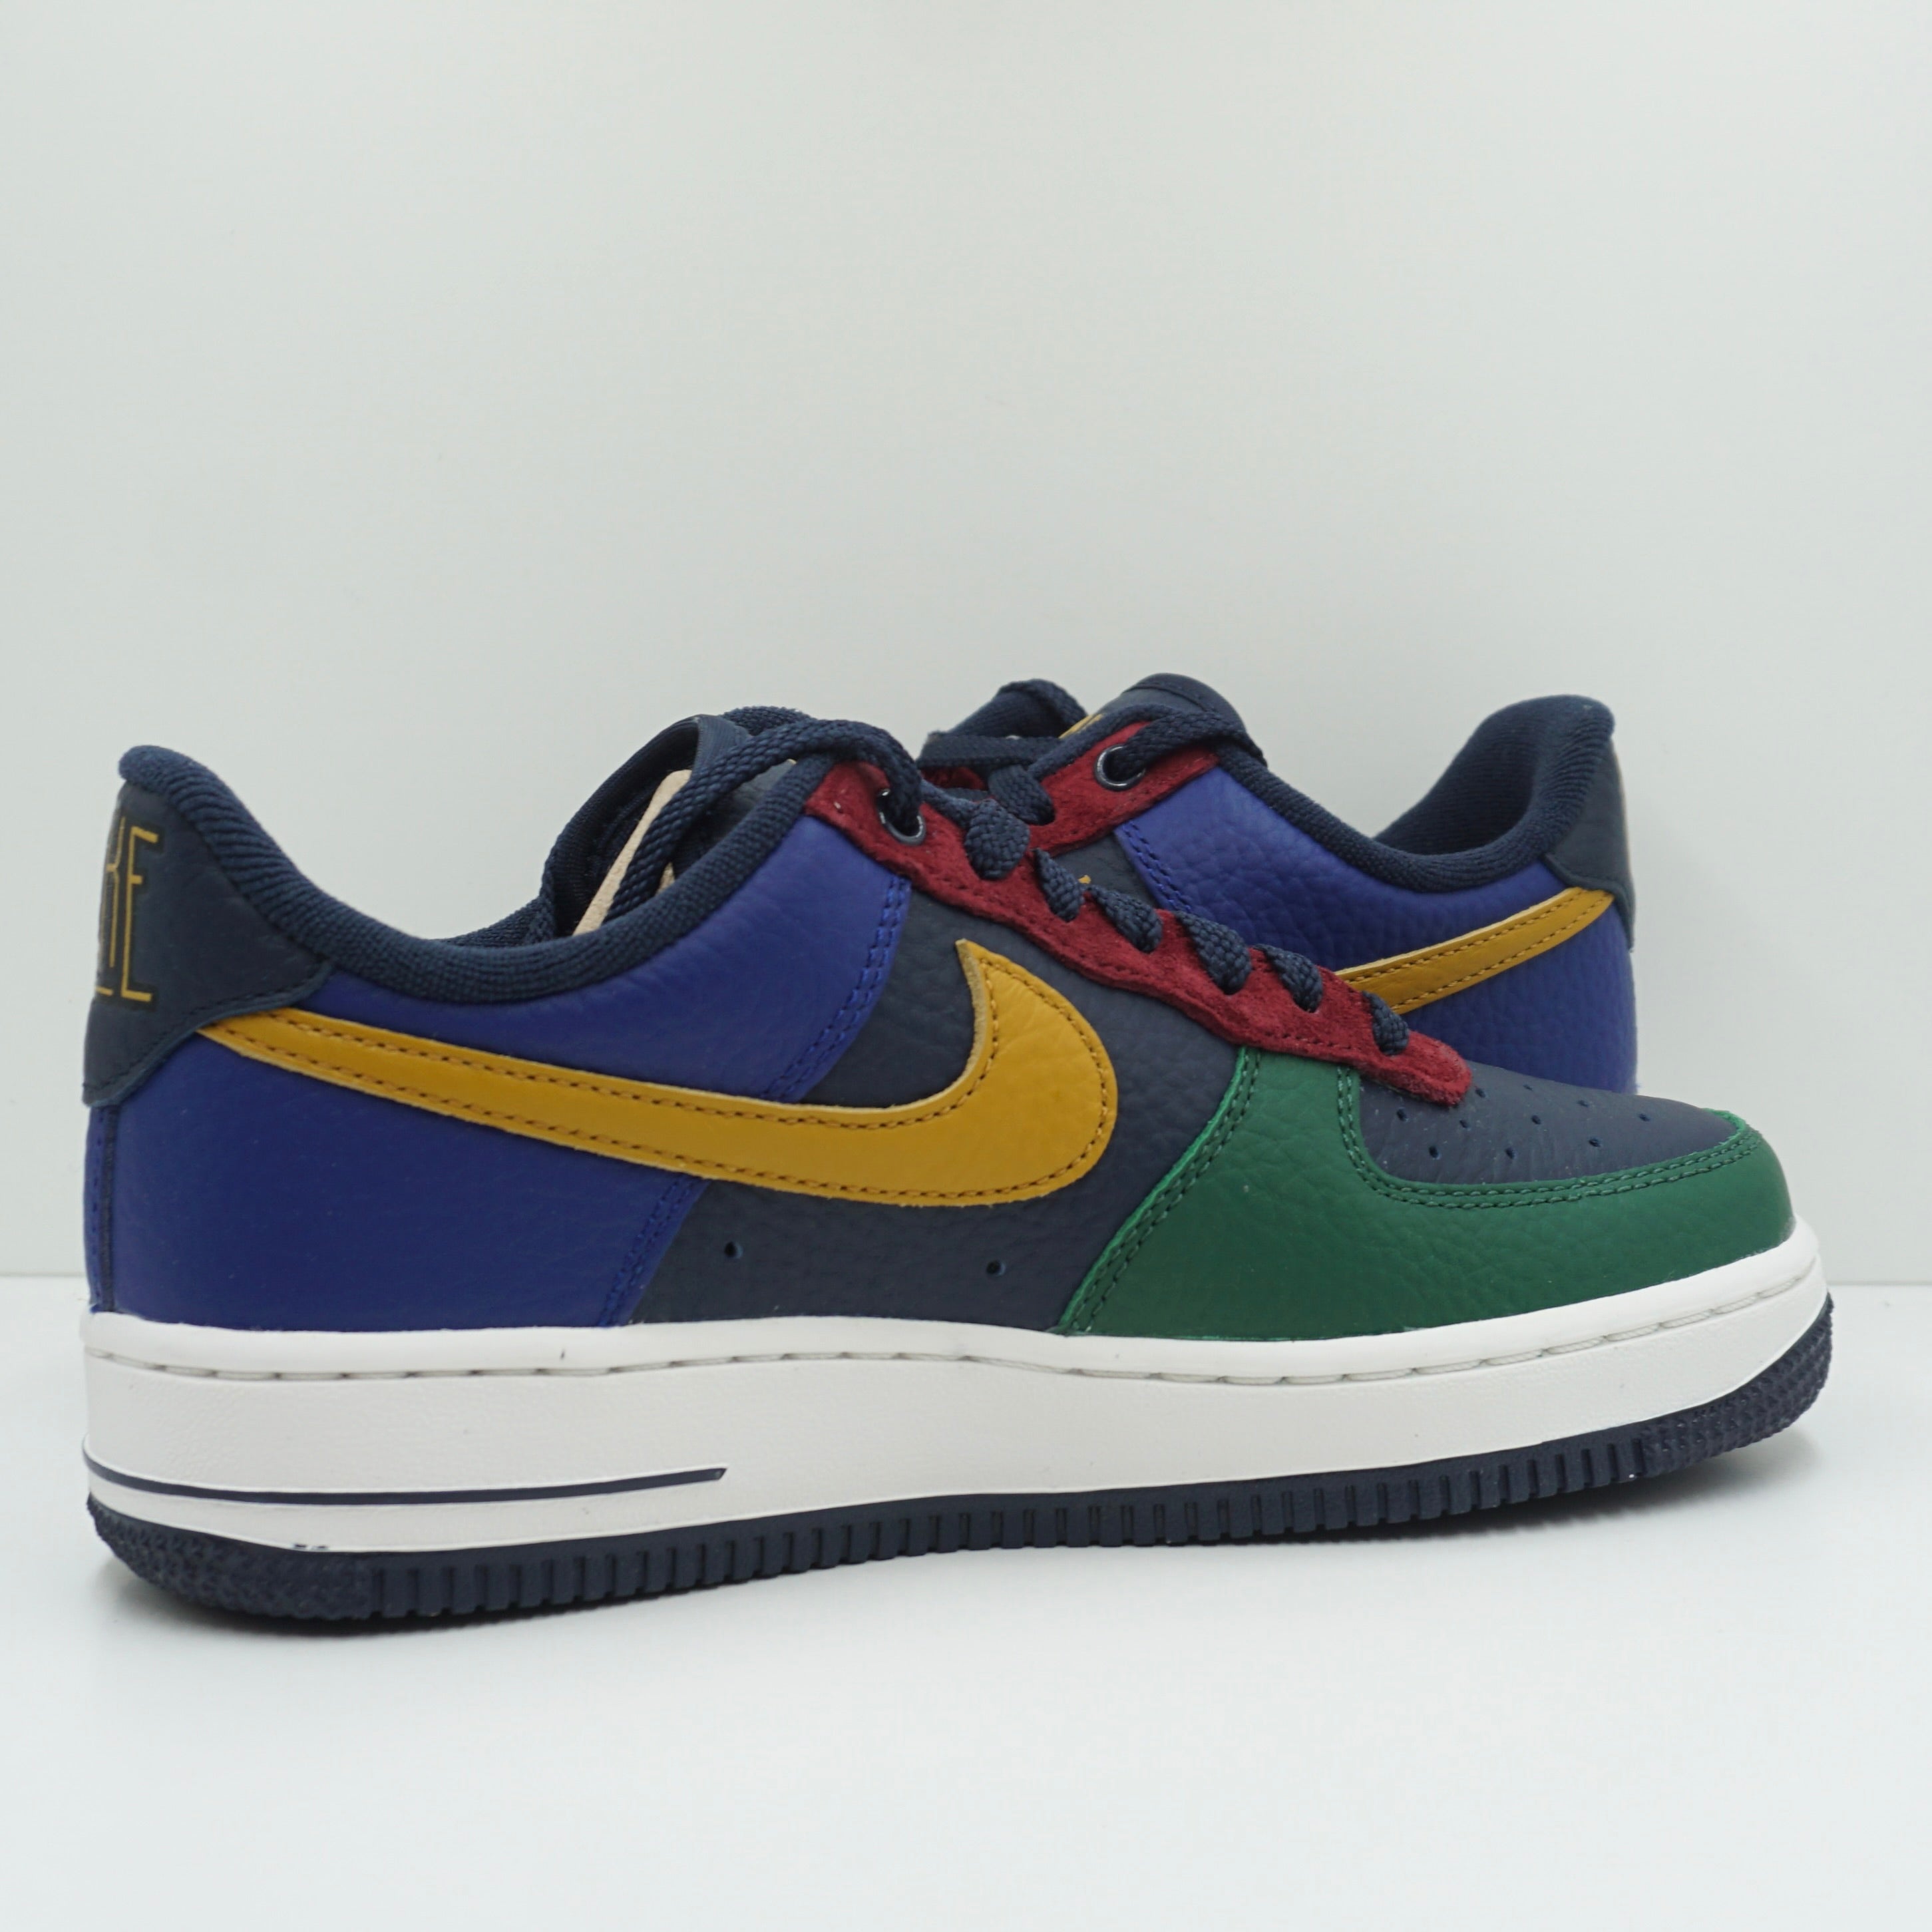 Nike Air Force 1 Low '07 LX Command Force Obsidian Gorge Green (W)